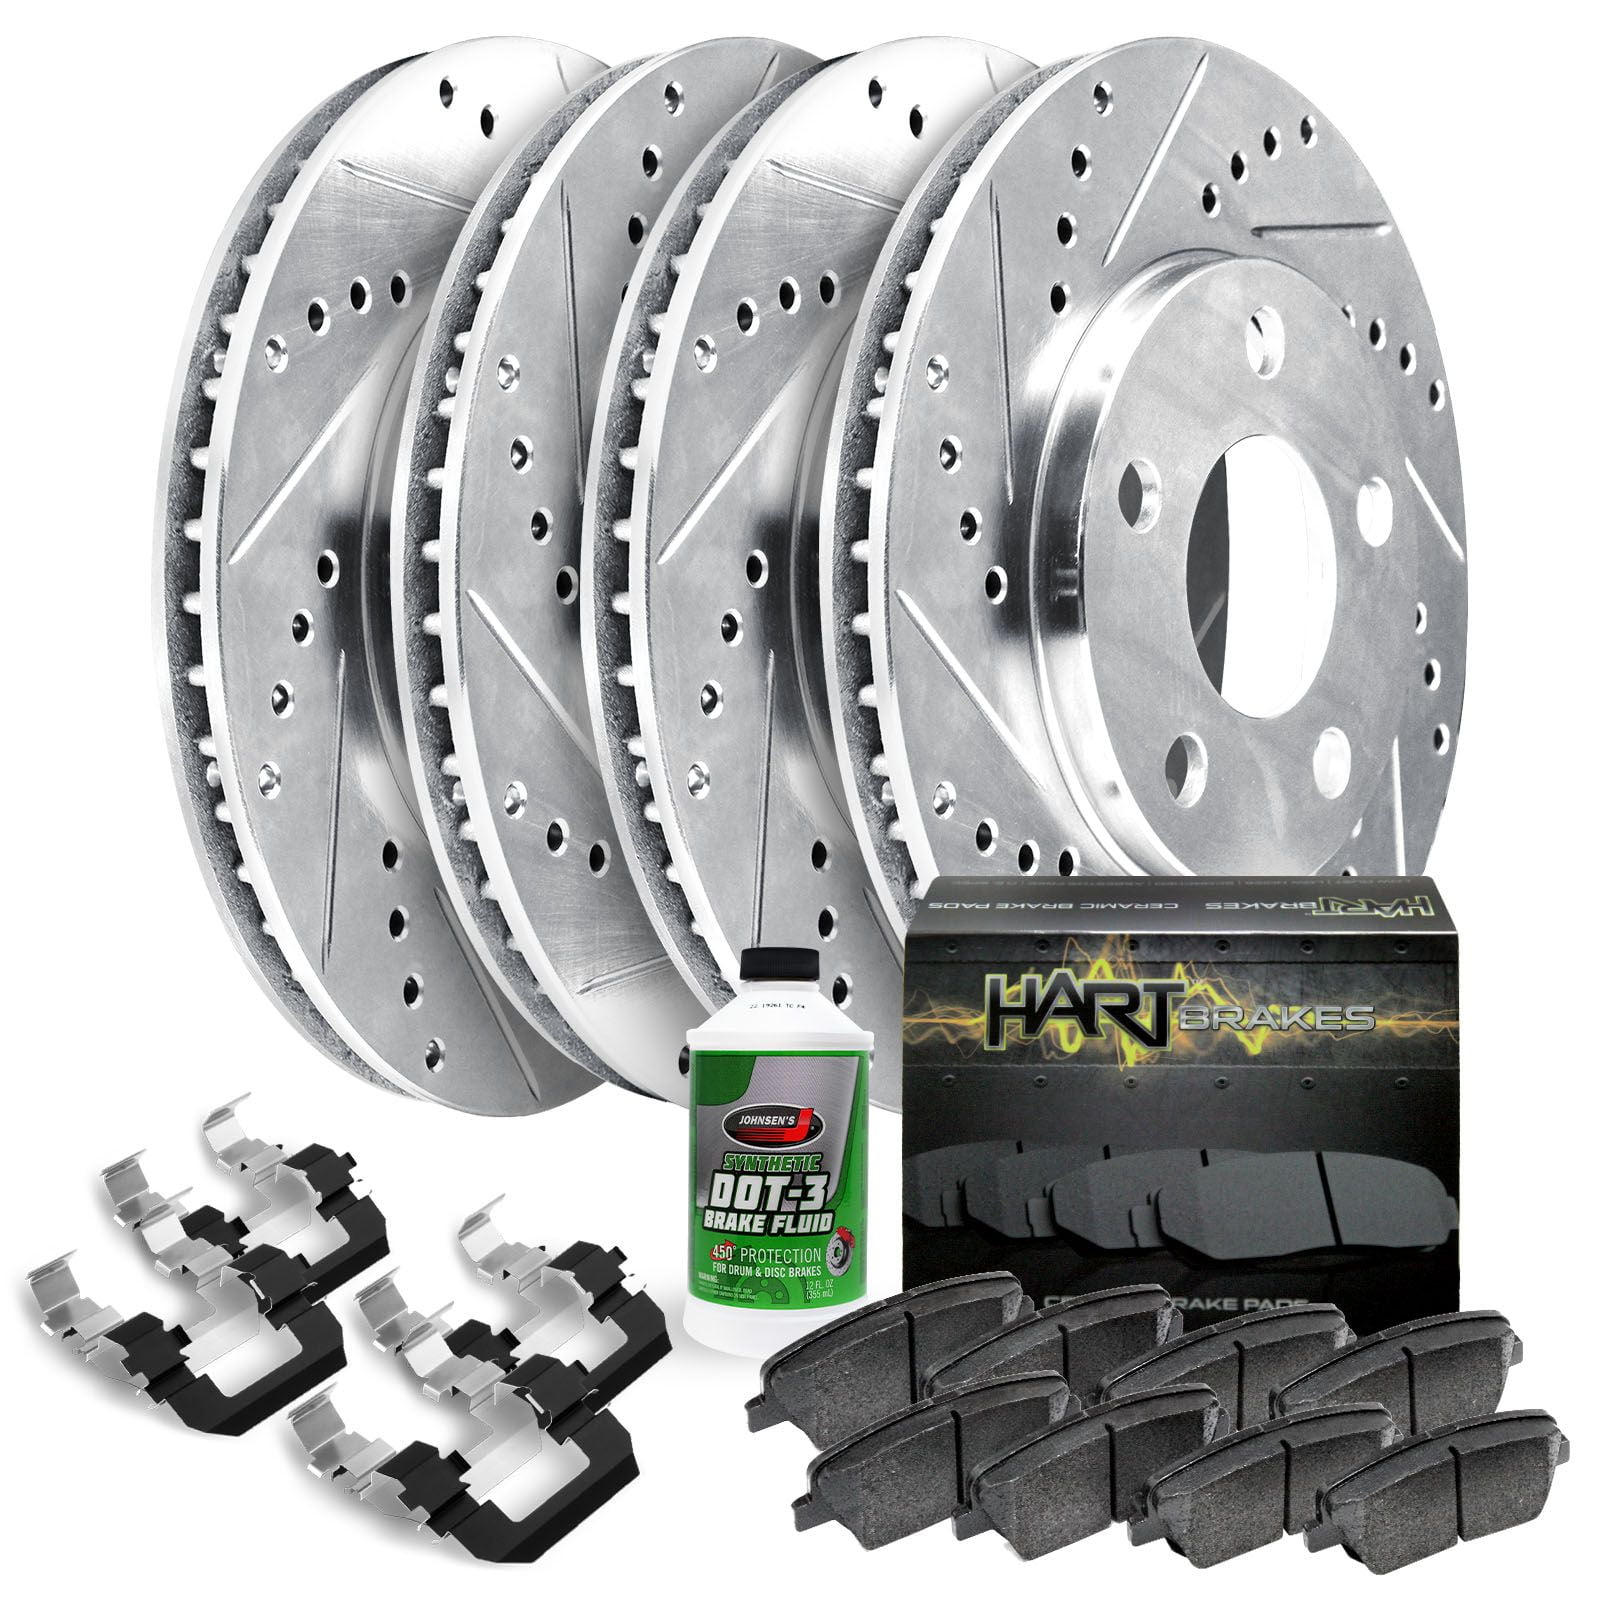 Full Kit Drilled Slotted Brake Rotors Disc and Ceramic Pads For 2000 GTX,Galant